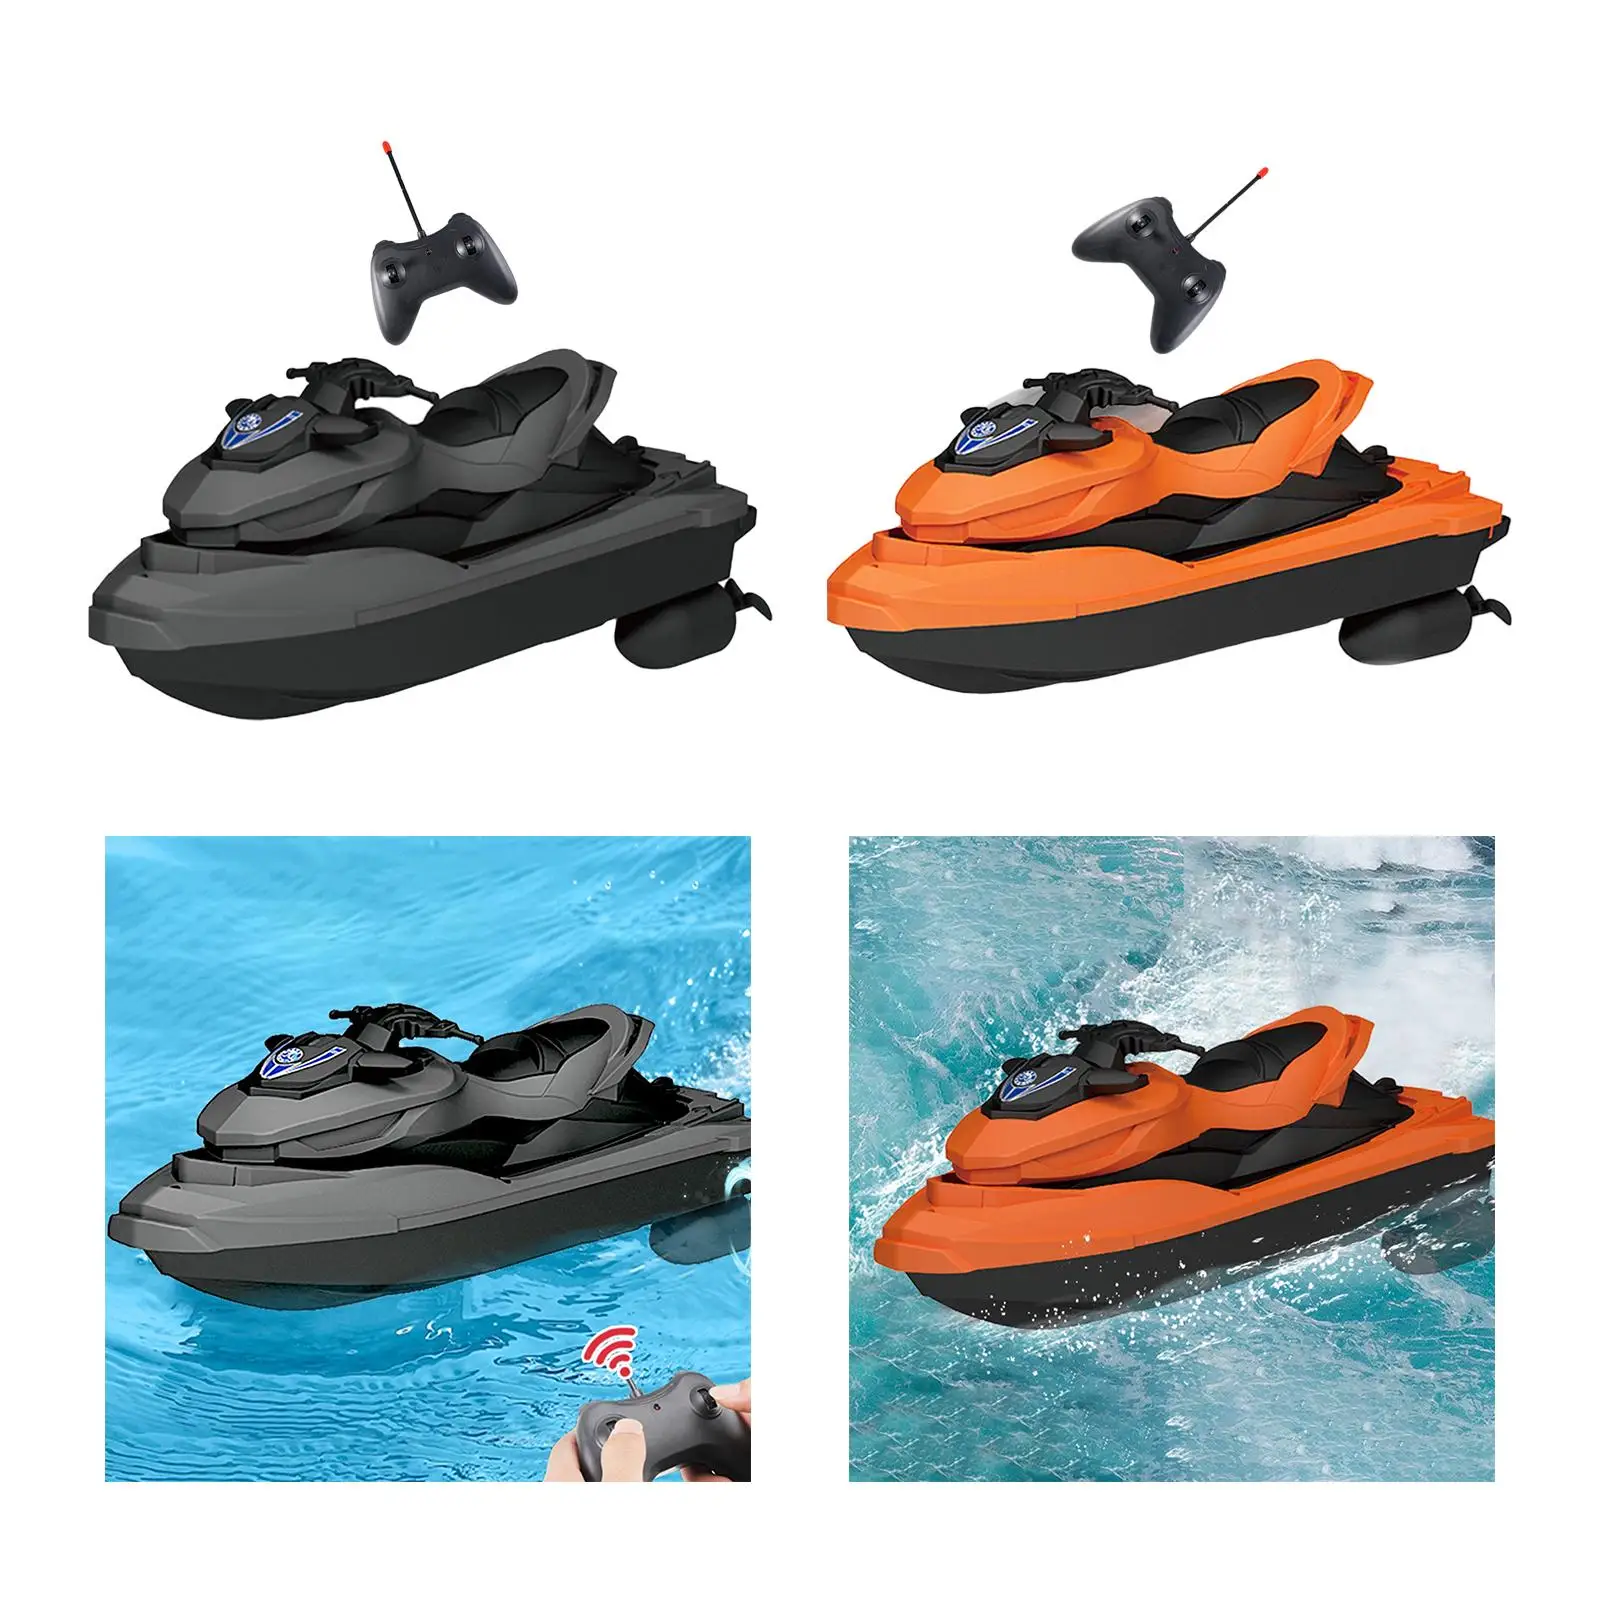 2.4G Remote Control Boat Double Motor High Powerful for Outdoor Toy,